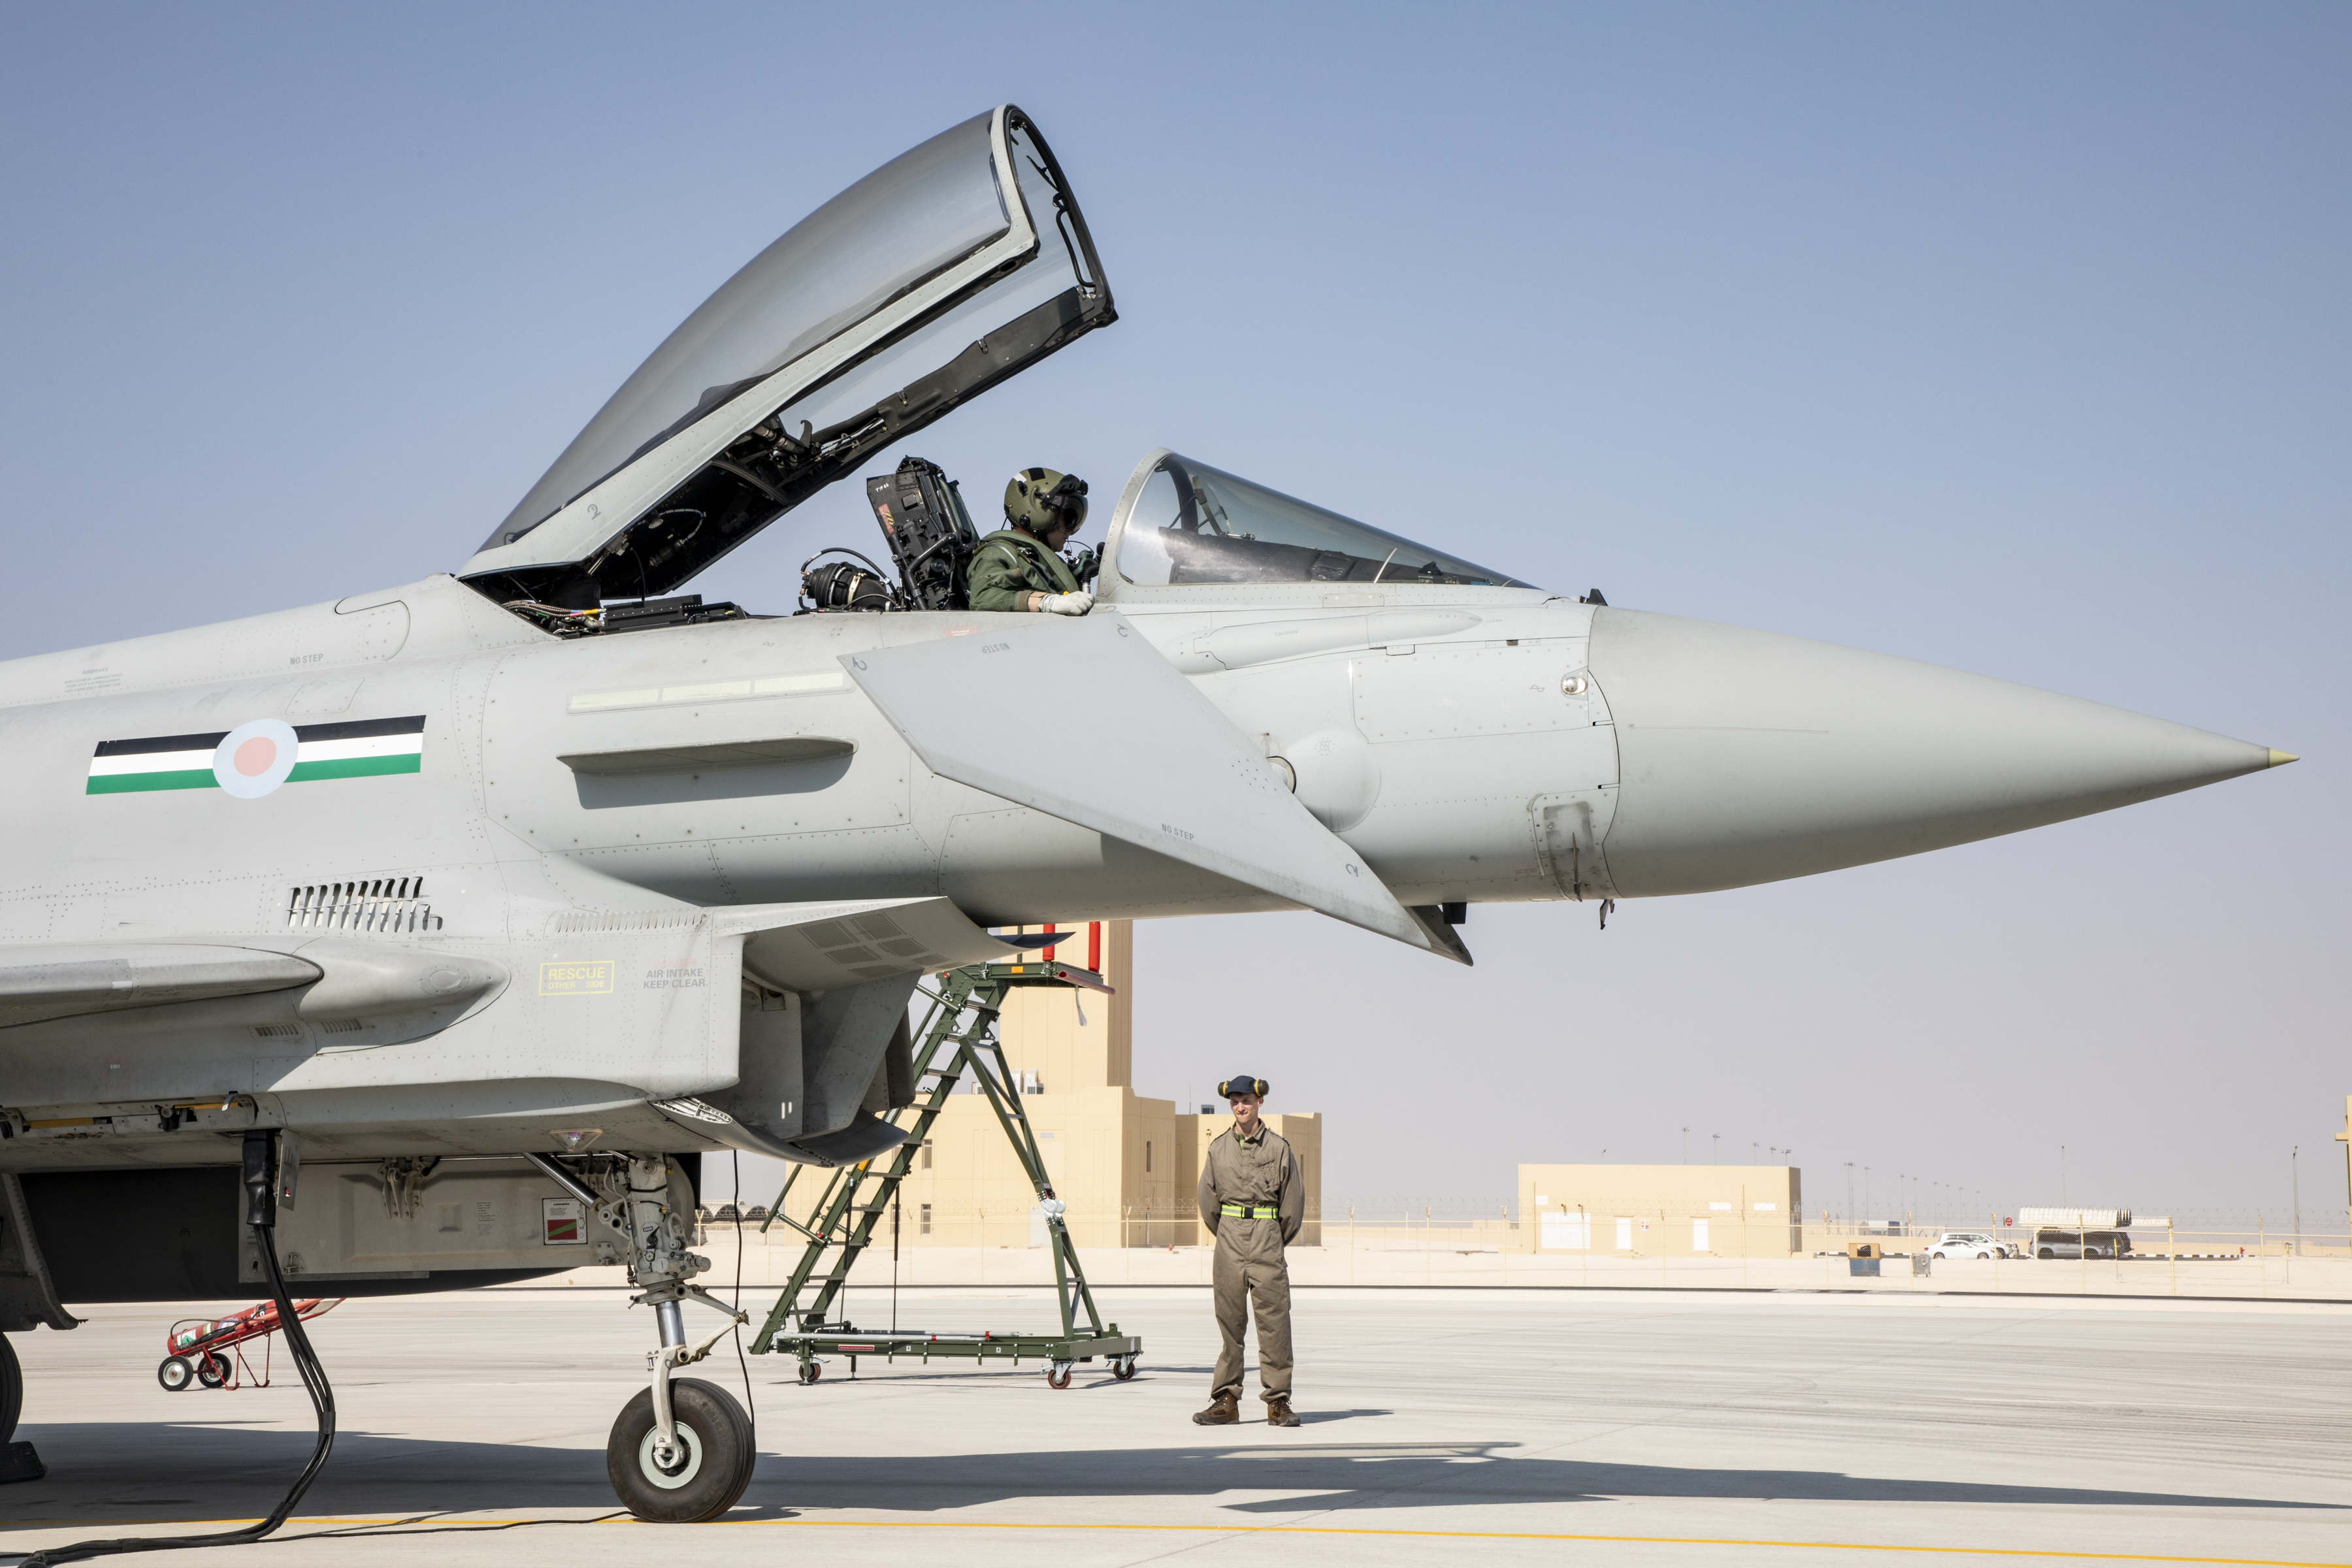 Image shows a pilot in the open cockpit of a Typhoon aircraft on the airfield in Qatar.